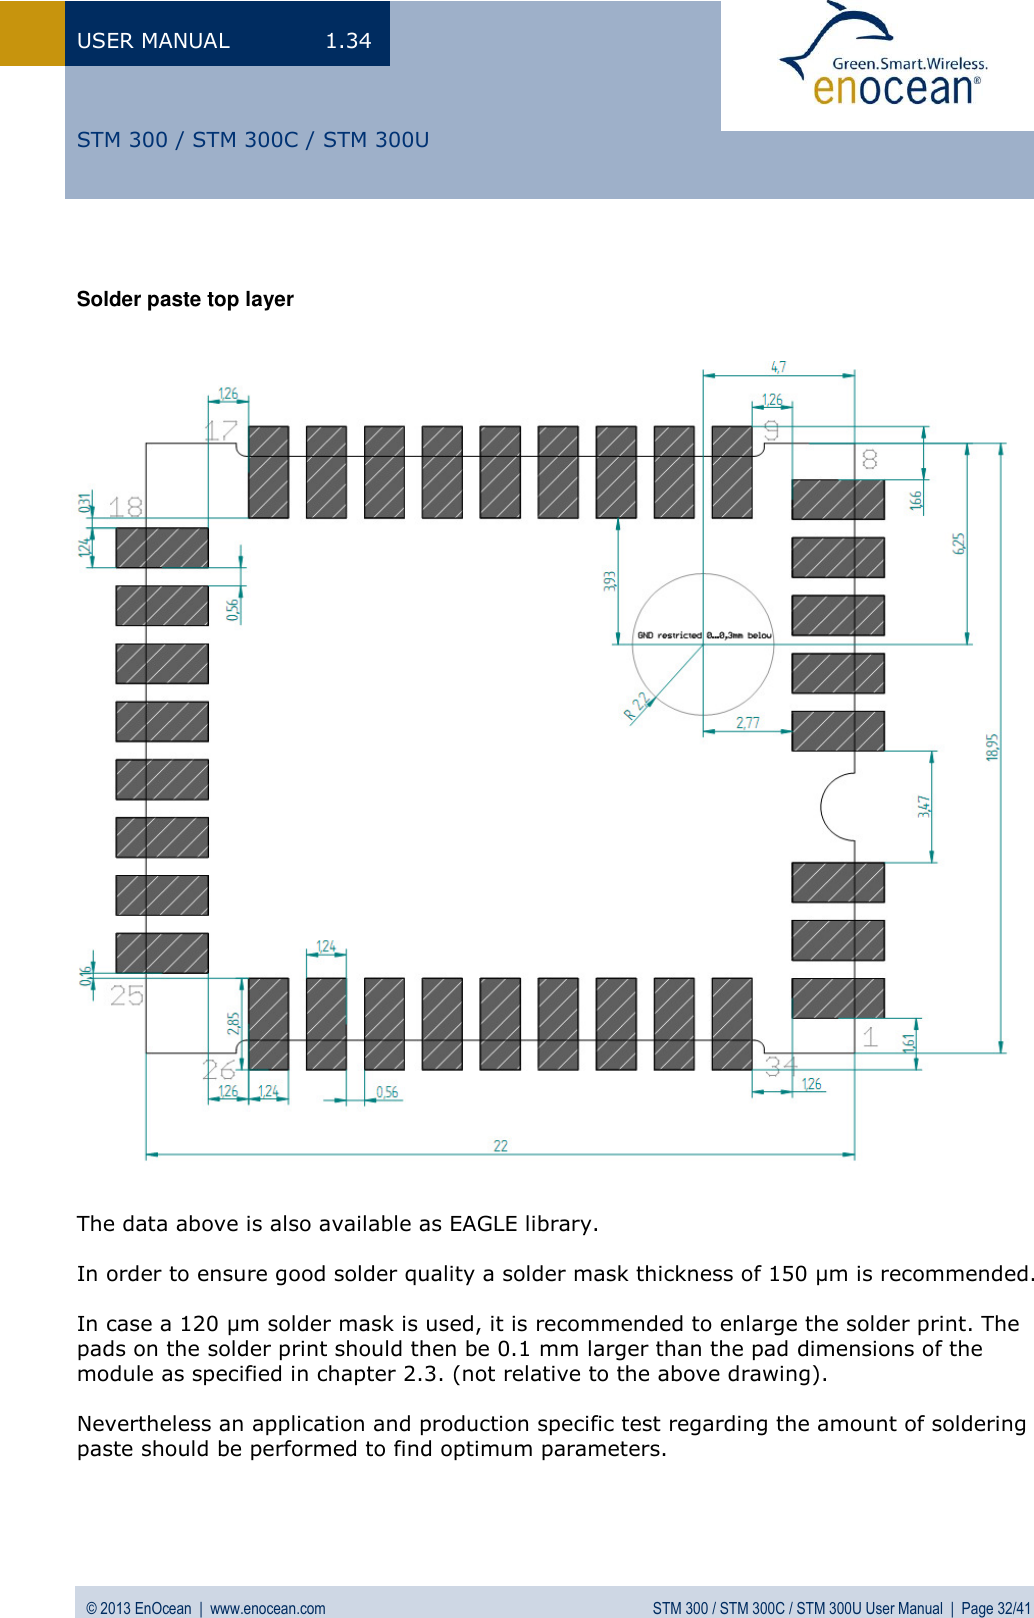 USER MANUAL  1.34 © 2013 EnOcean  |  www.enocean.com  STM 300 / STM 300C / STM 300U User Manual  |  Page 32/41   STM 300 / STM 300C / STM 300U   Solder paste top layer                                     The data above is also available as EAGLE library.  In order to ensure good solder quality a solder mask thickness of 150 µm is recommended.  In case a 120 µm solder mask is used, it is recommended to enlarge the solder print. The pads on the solder print should then be 0.1 mm larger than the pad dimensions of the module as specified in chapter 2.3. (not relative to the above drawing).   Nevertheless an application and production specific test regarding the amount of soldering paste should be performed to find optimum parameters.     